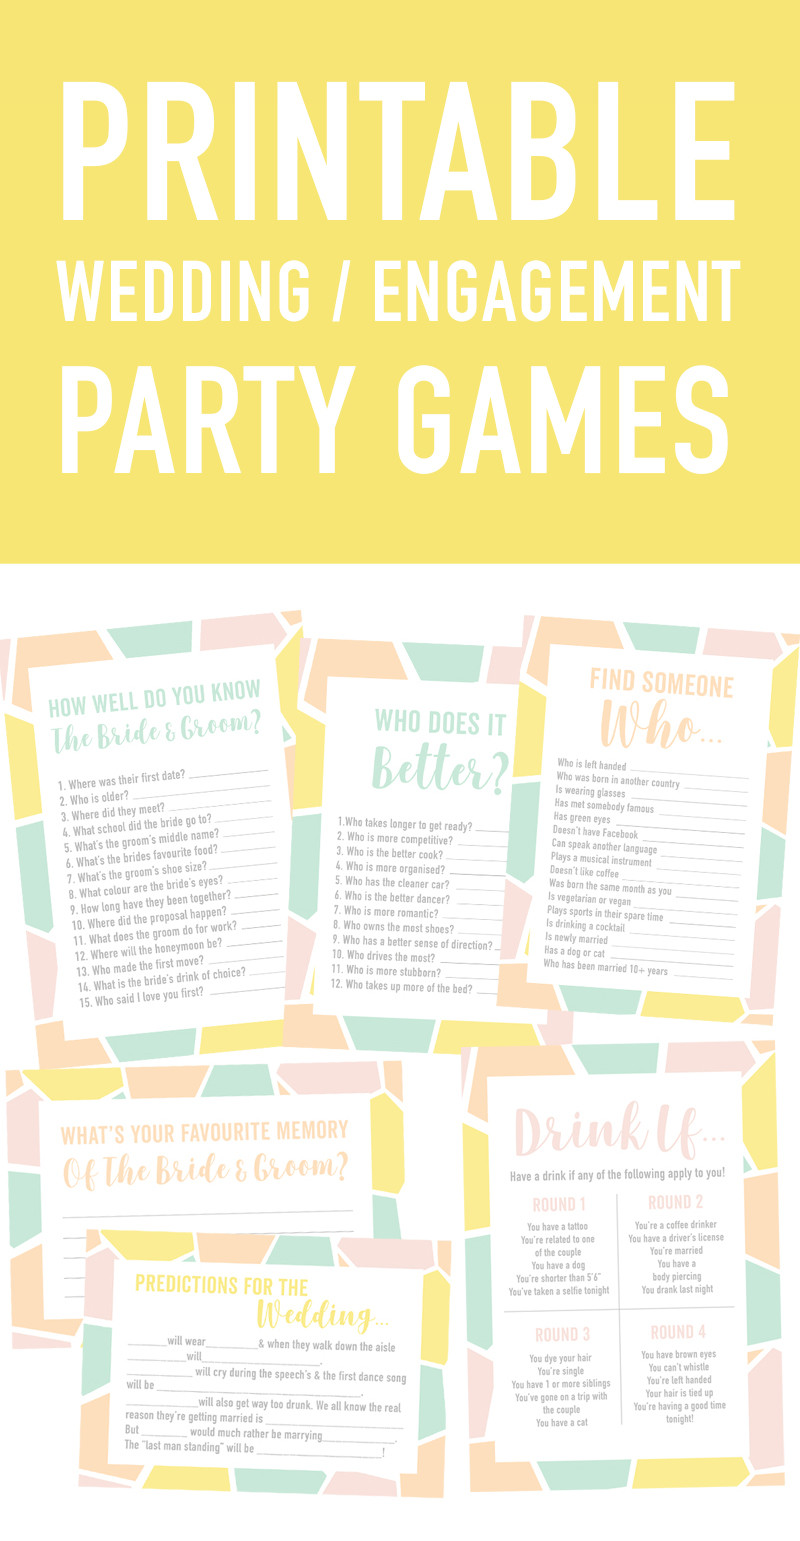 21-of-the-best-ideas-for-game-ideas-for-engagement-party-home-family